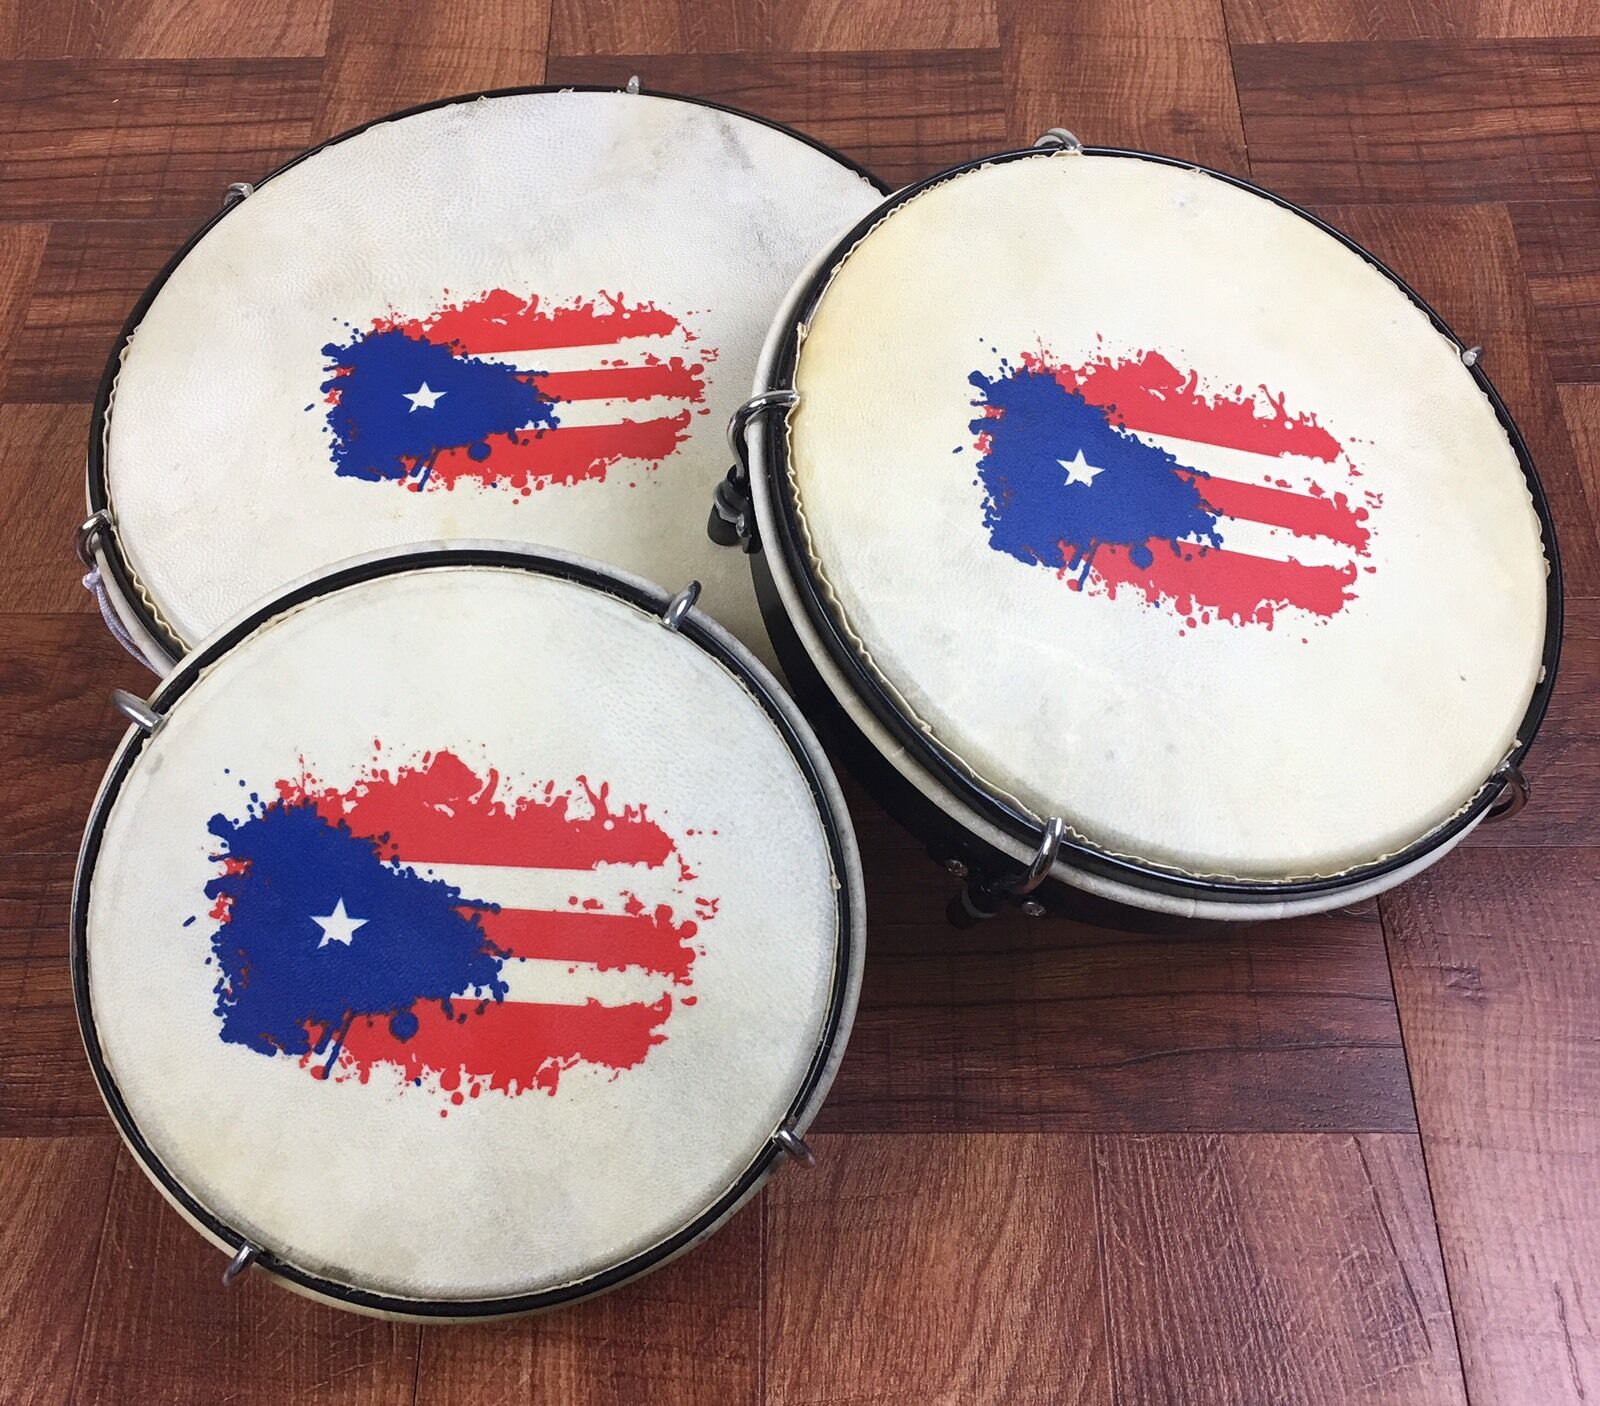 Plenera Drums, Set Of 3 Drums with Carry Bag-And Puerto Rico Flag.